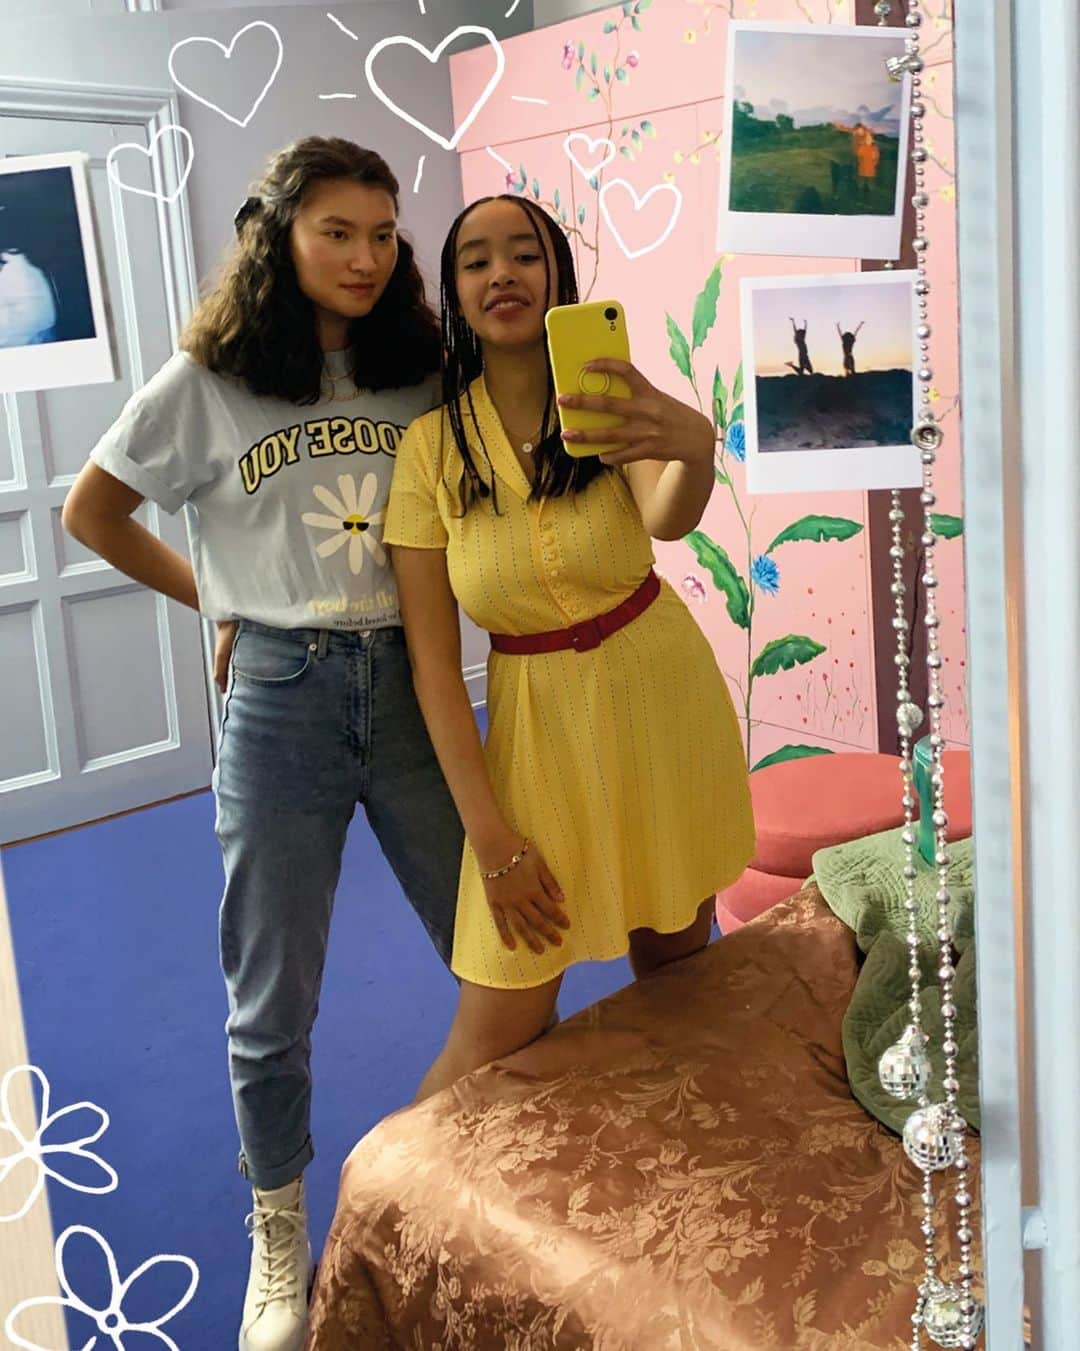 H&Mのインスタグラム：「Wanna copy Lara Jean's look from the new TATB movie? With this yellow dress, you can!   #ToAllTheBoysxHM is out now (11 March in US). #HM #ToAllTheBoys #Netflix @toalltheboysnetflix   Lottie tee TAB co lab: 0961152001 Mom High Ankle Jeans: 0572998009 Three-strand necklace: 0983071001 Boots: 0921572003 Shirt dress: 0971359002 Patent belt: 0954589001 TATB JEWELLERY PACK: 0961995001」